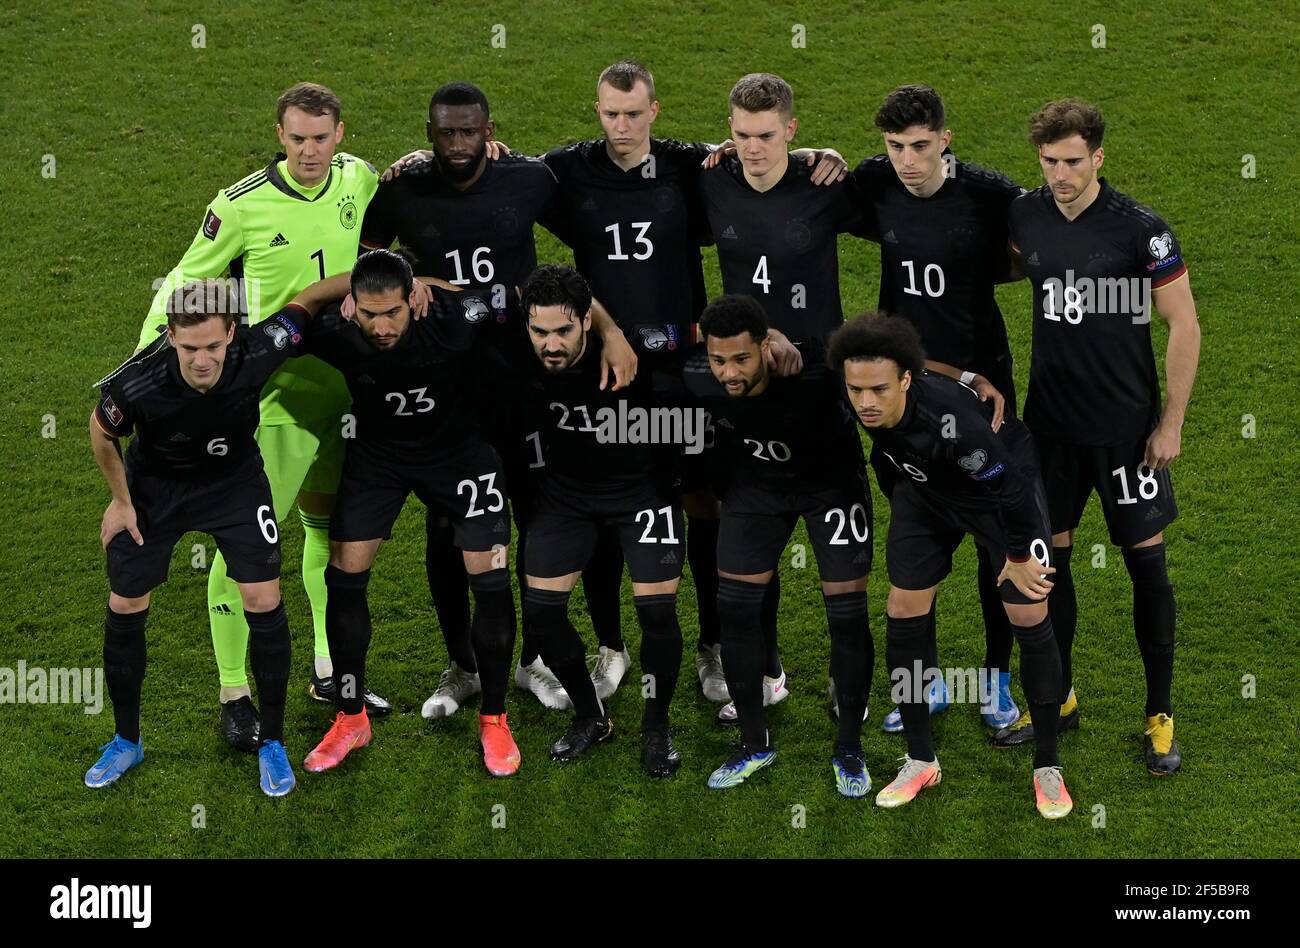 Soccer Football - World Cup Qualifiers Europe - Group J - Germany v Iceland - MSV-Arena, Duisburg, Germany - March 25, 2021 Germany players pose for a team group photo before the match Pool via REUTERS/Tobias Schwarz Stock Photo